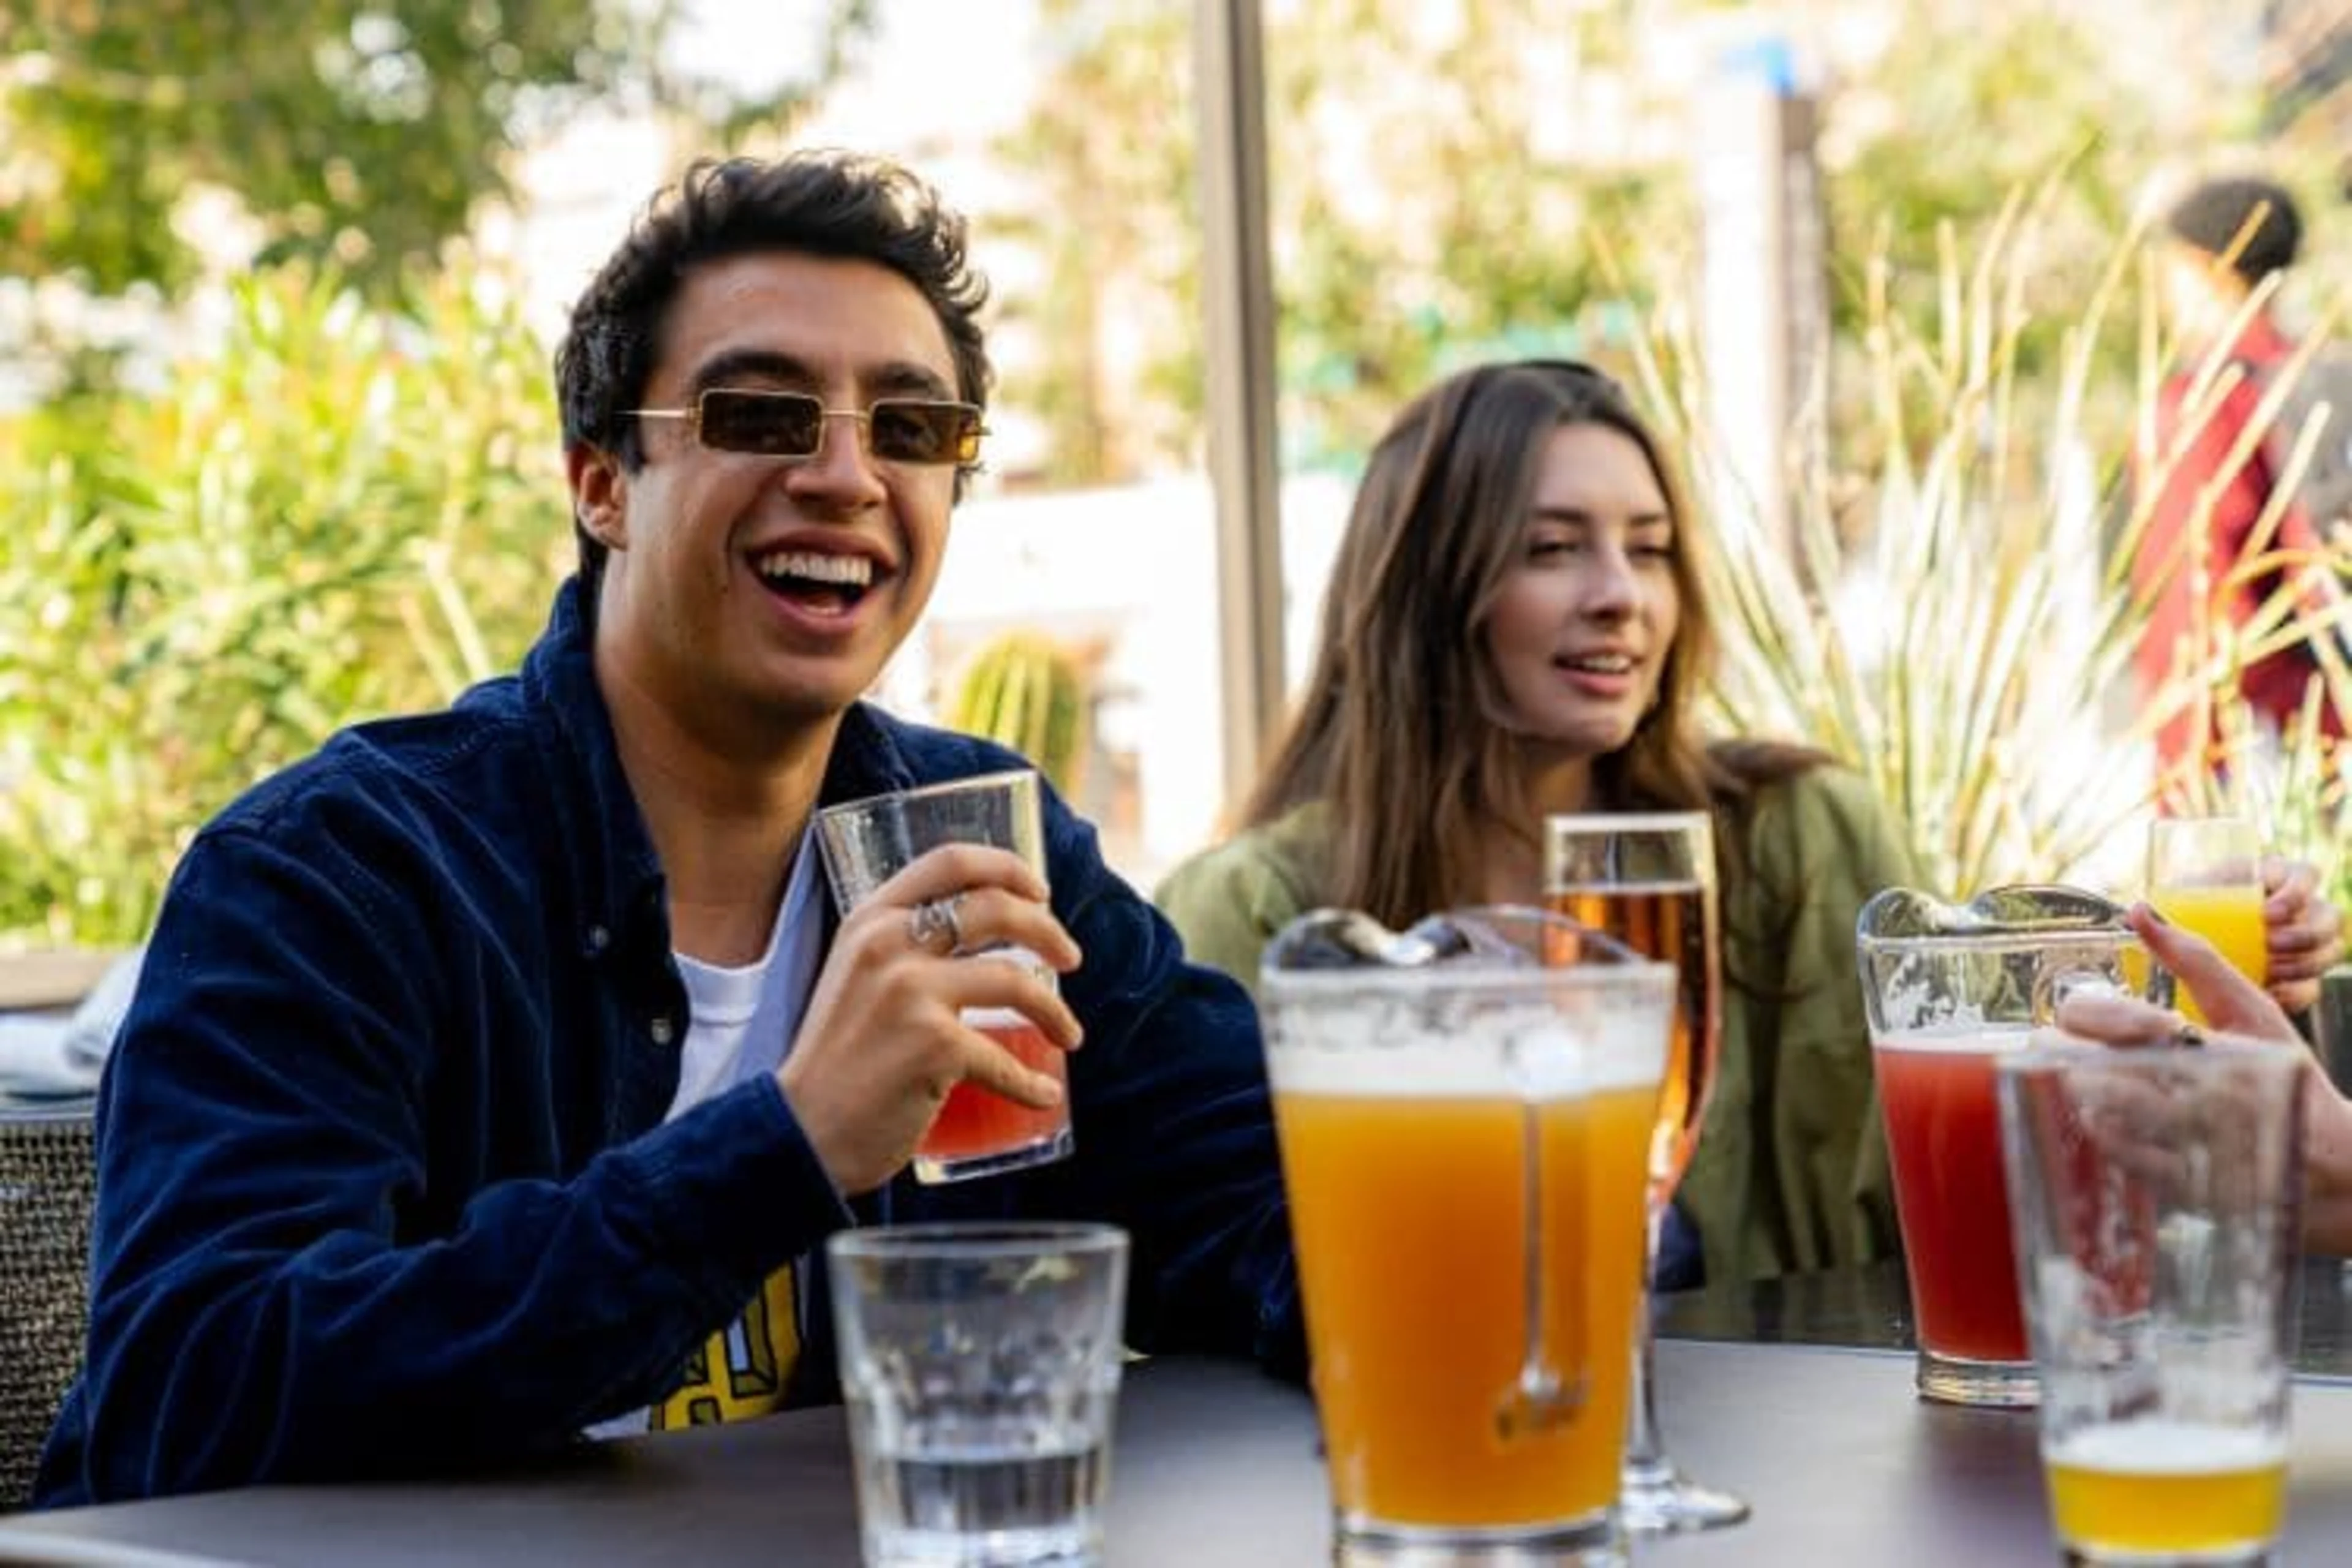 Two young people drinking a pitcher of beer and smiling.